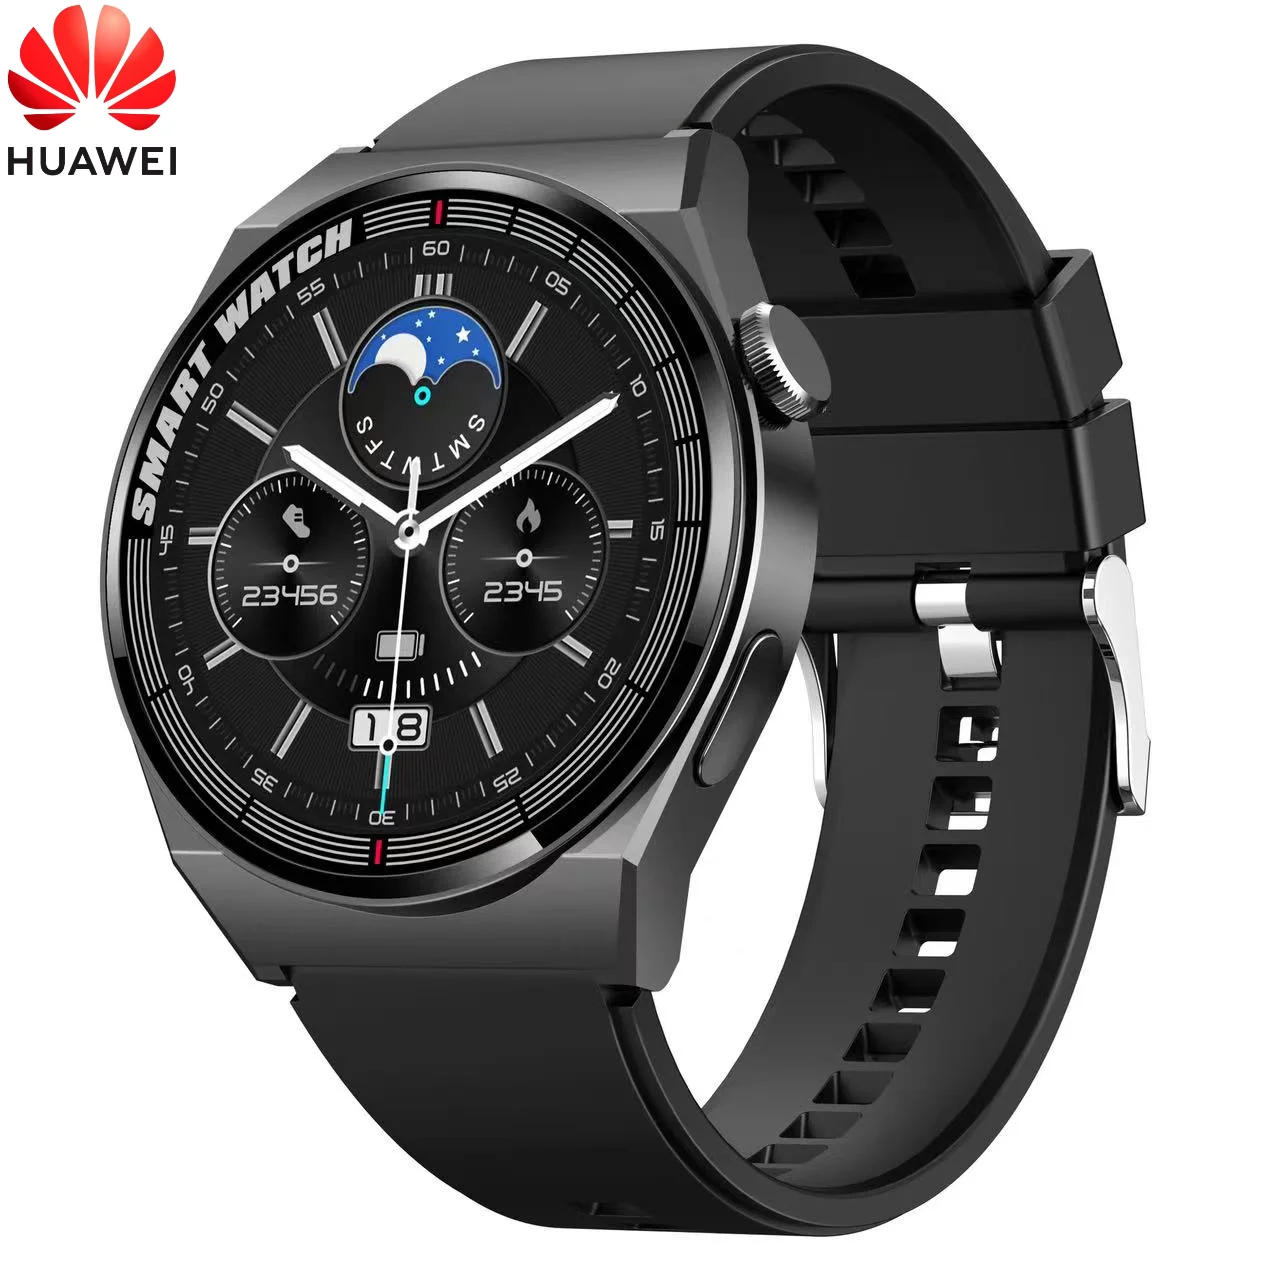 

2023 Huawei GT3 Smart Watch 390*390 Display Men Android Bluetooth Call IP68 Waterproof Fitness Tracker twatch for Samsung Xiaomi